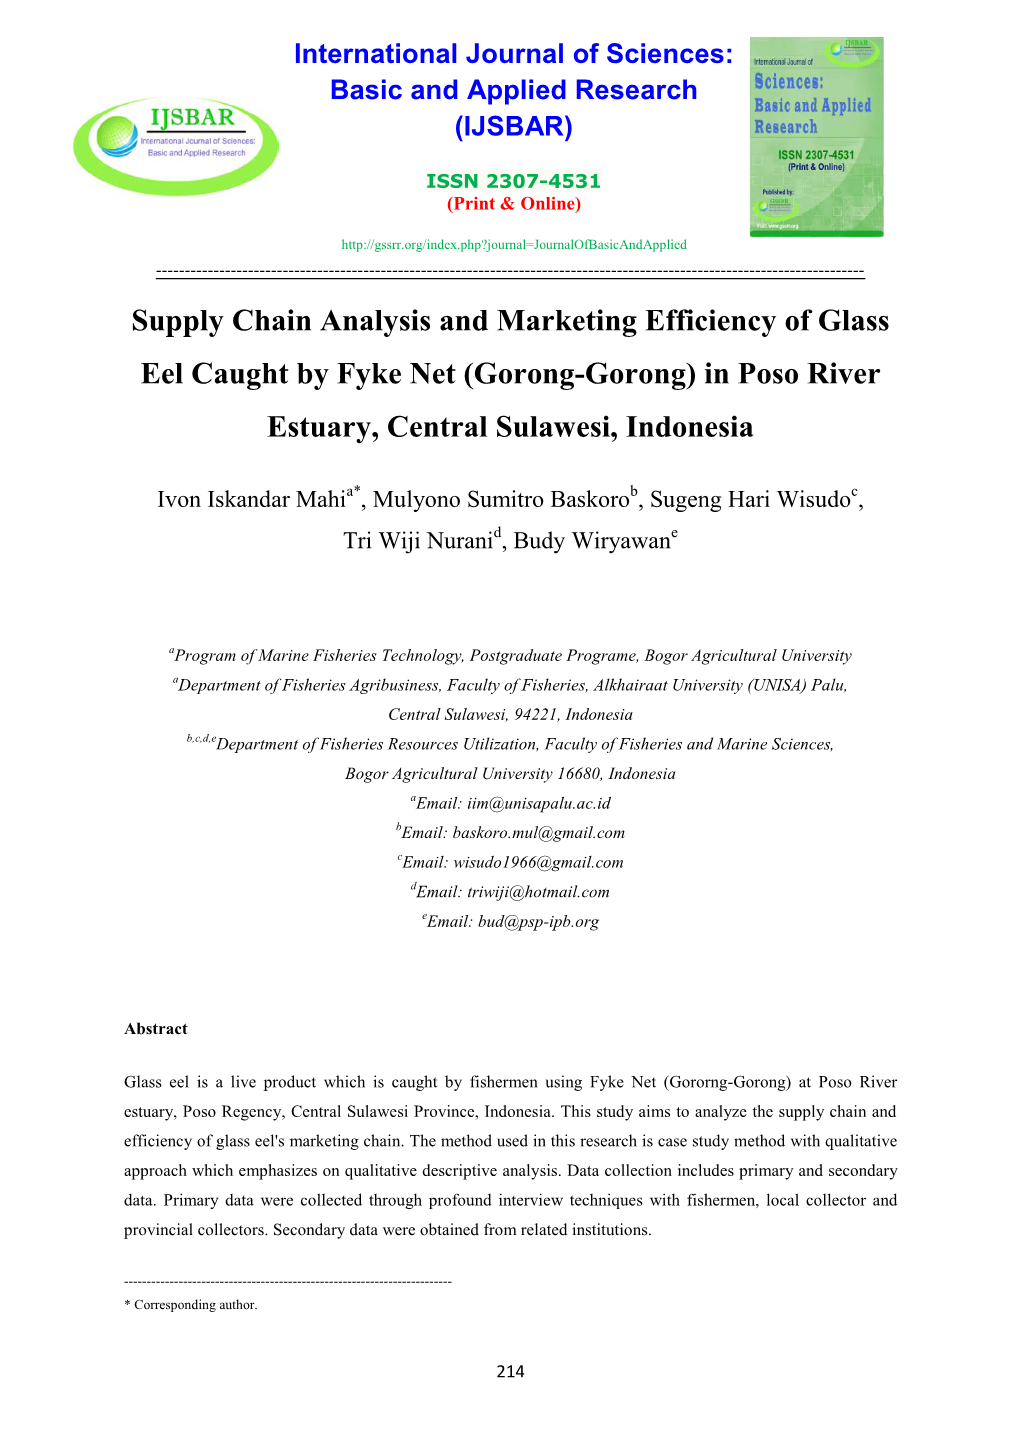 Supply Chain Analysis and Marketing Efficiency of Glass Eel Caught by Fyke Net (Gorong-Gorong) in Poso River Estuary, Central Sulawesi, Indonesia